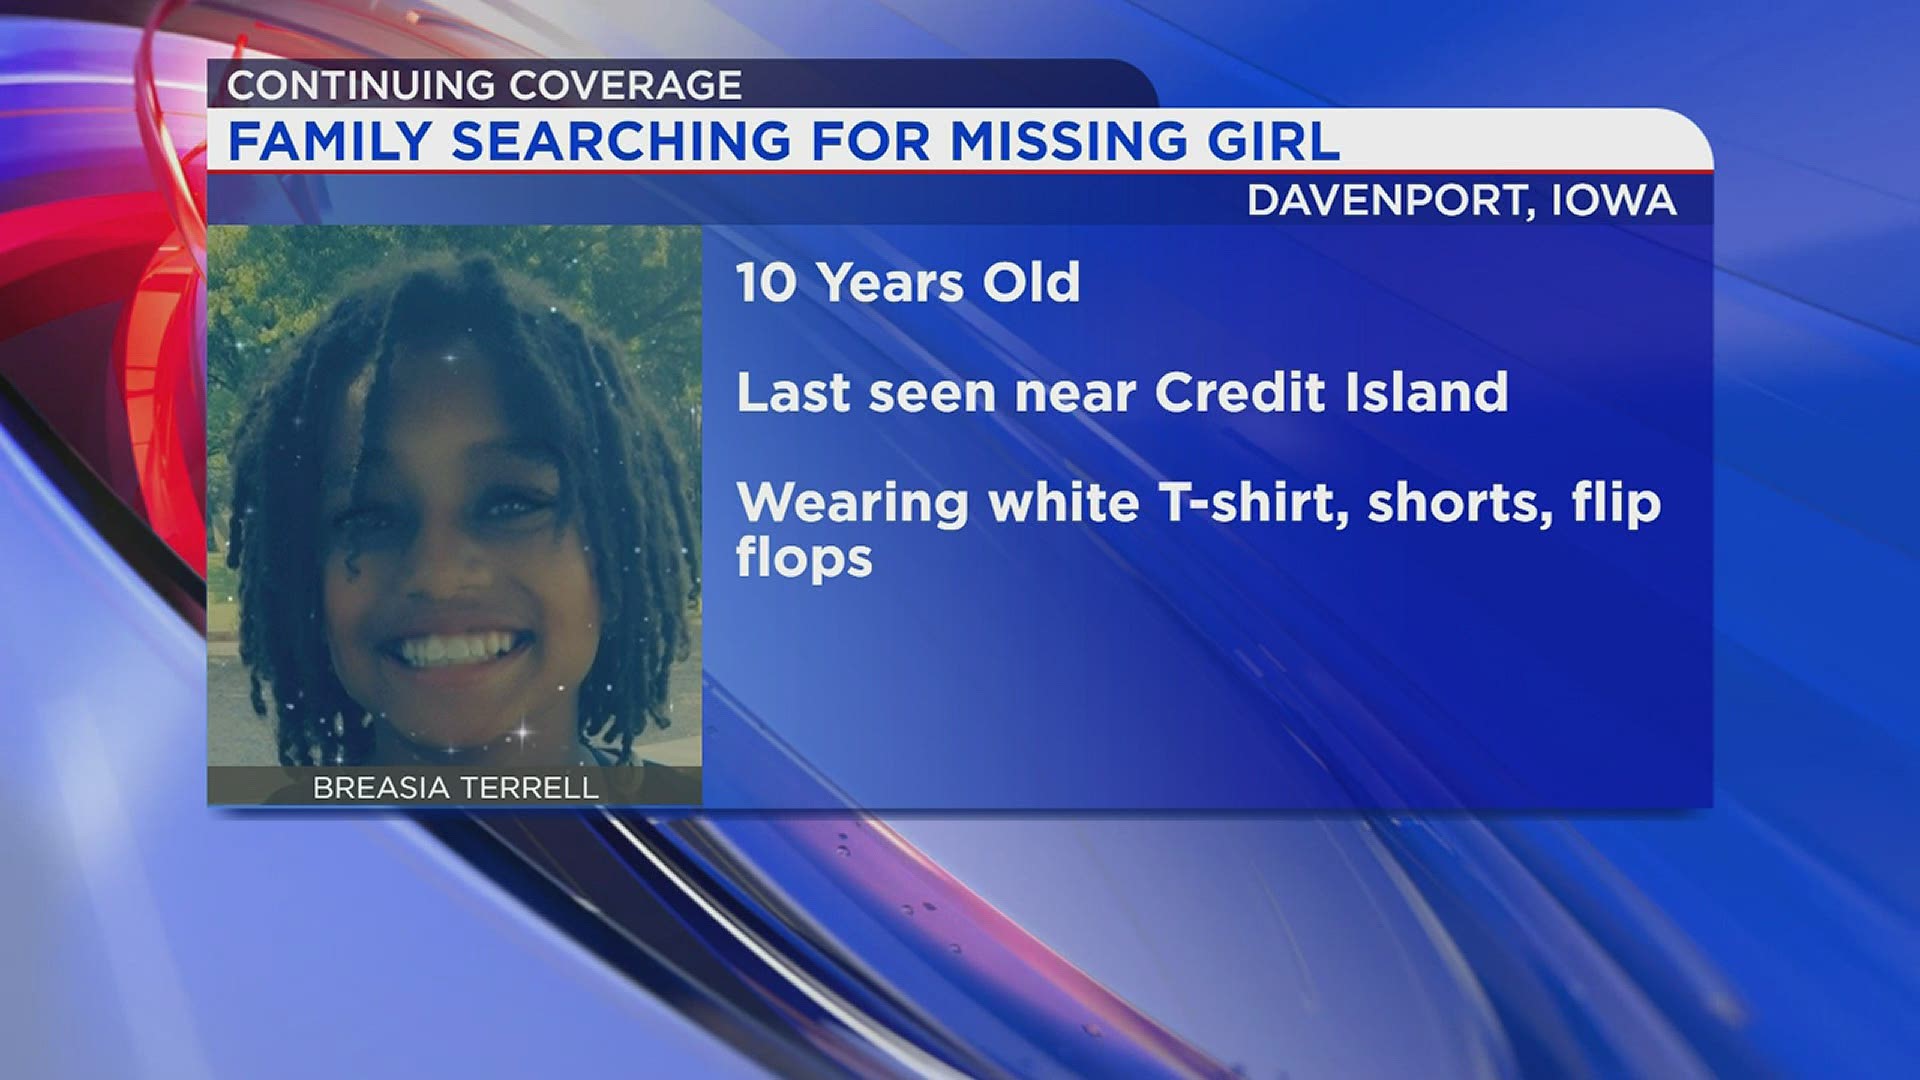 An update on the Davenport missing person case.